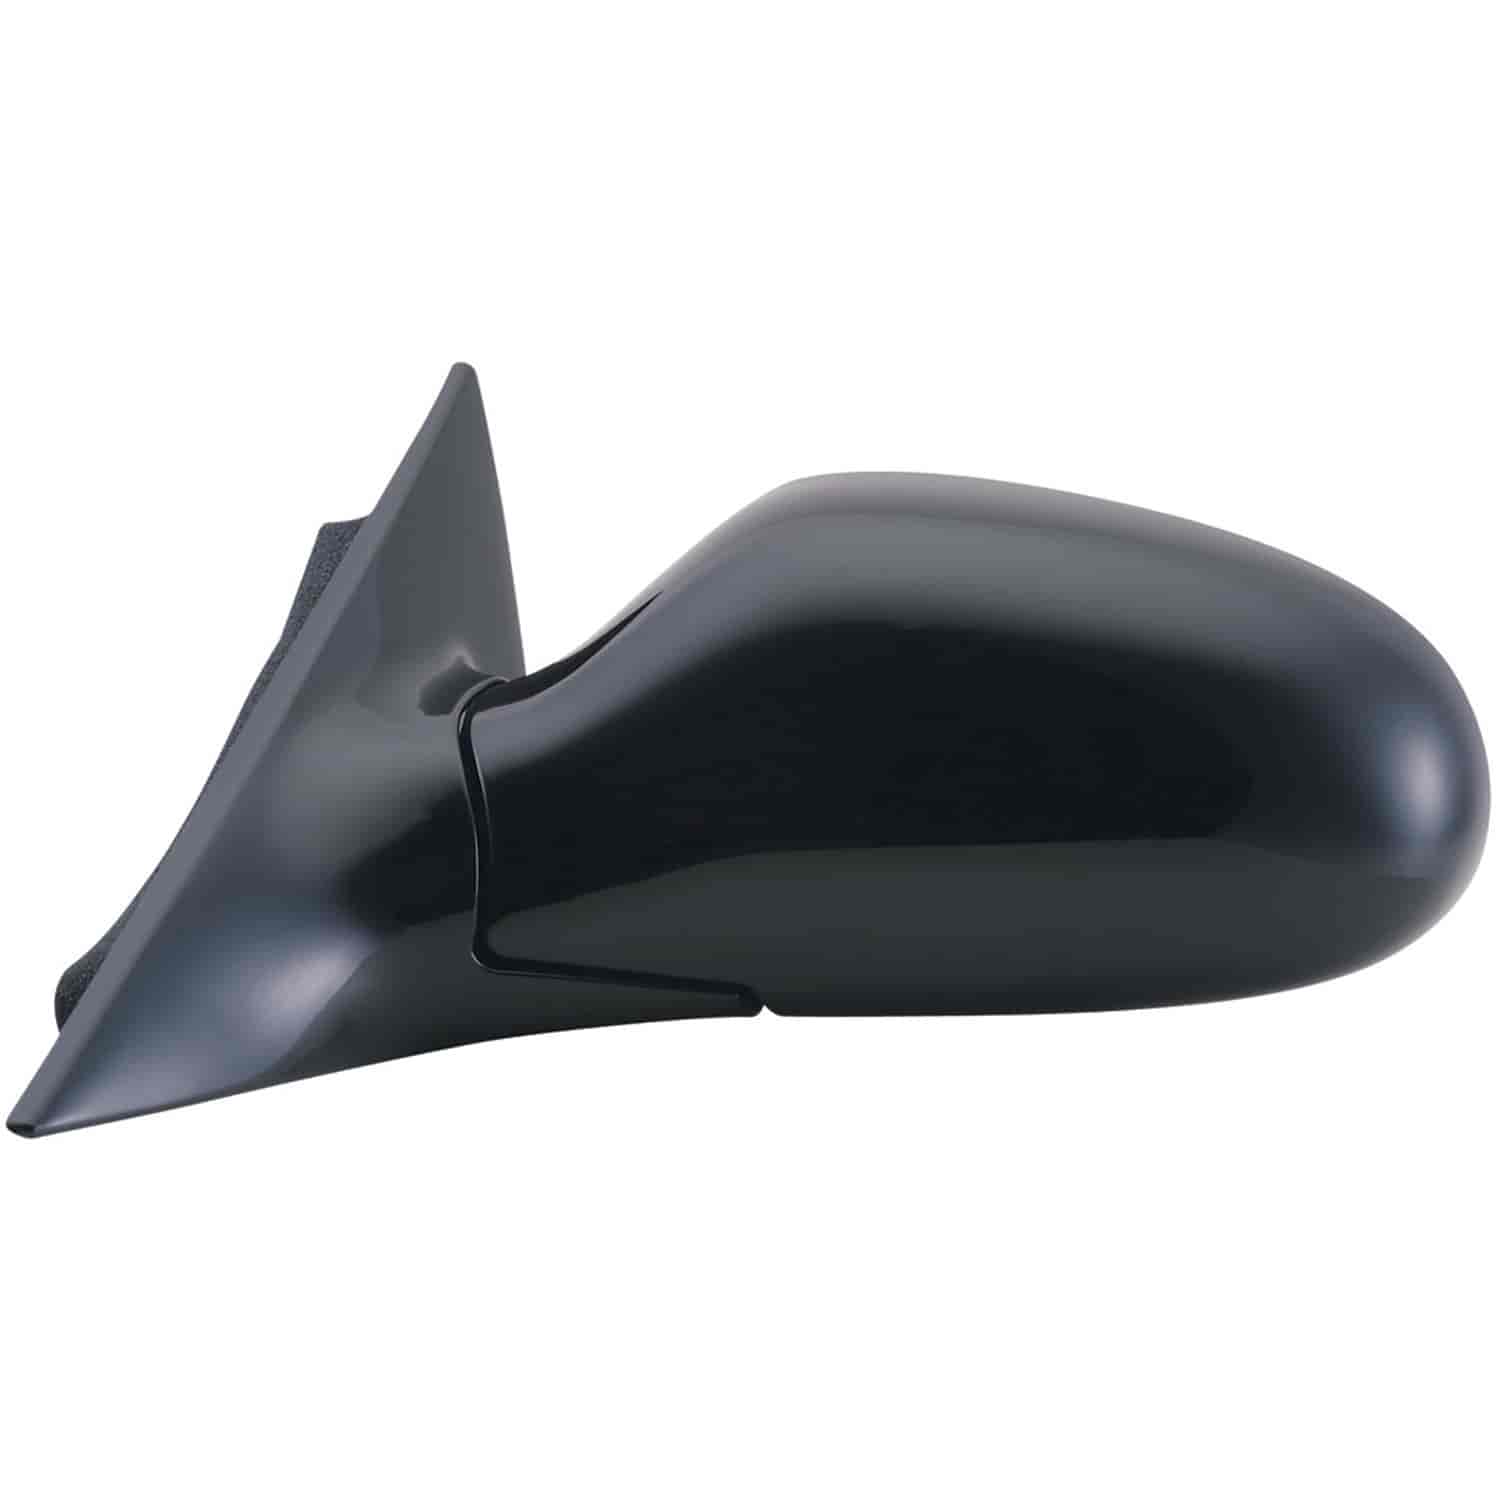 OEM Style Replacement mirror for 96-00 Chrysler Sebring Convertible driver side mirror tested to fit